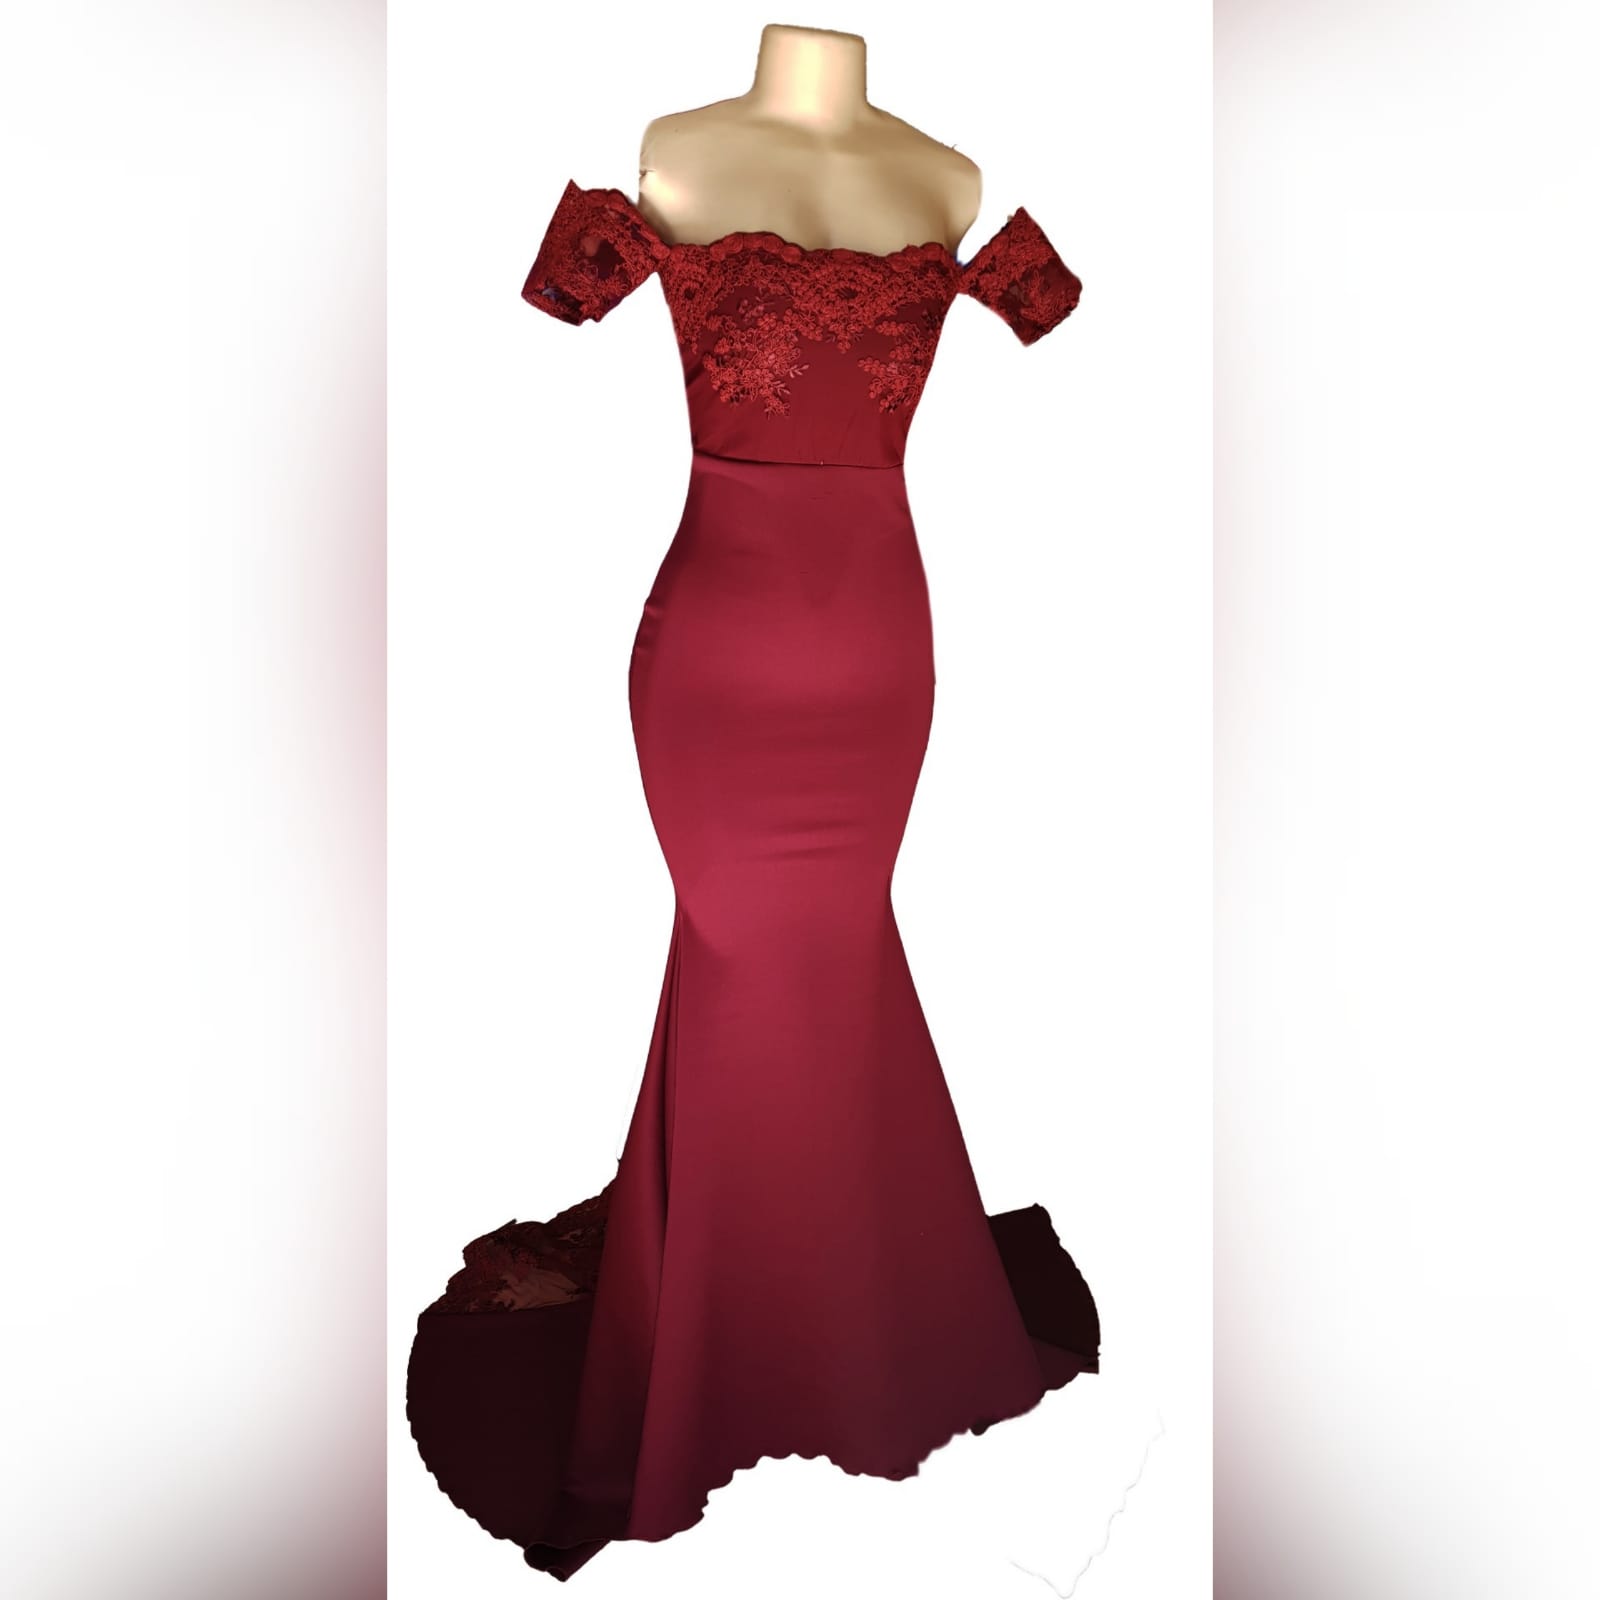 Maroon soft mermaid evening dress with lace bodice 1 maroon soft mermaid evening dress with lace bodice, back detailed with lace. With a lace train and lace border.